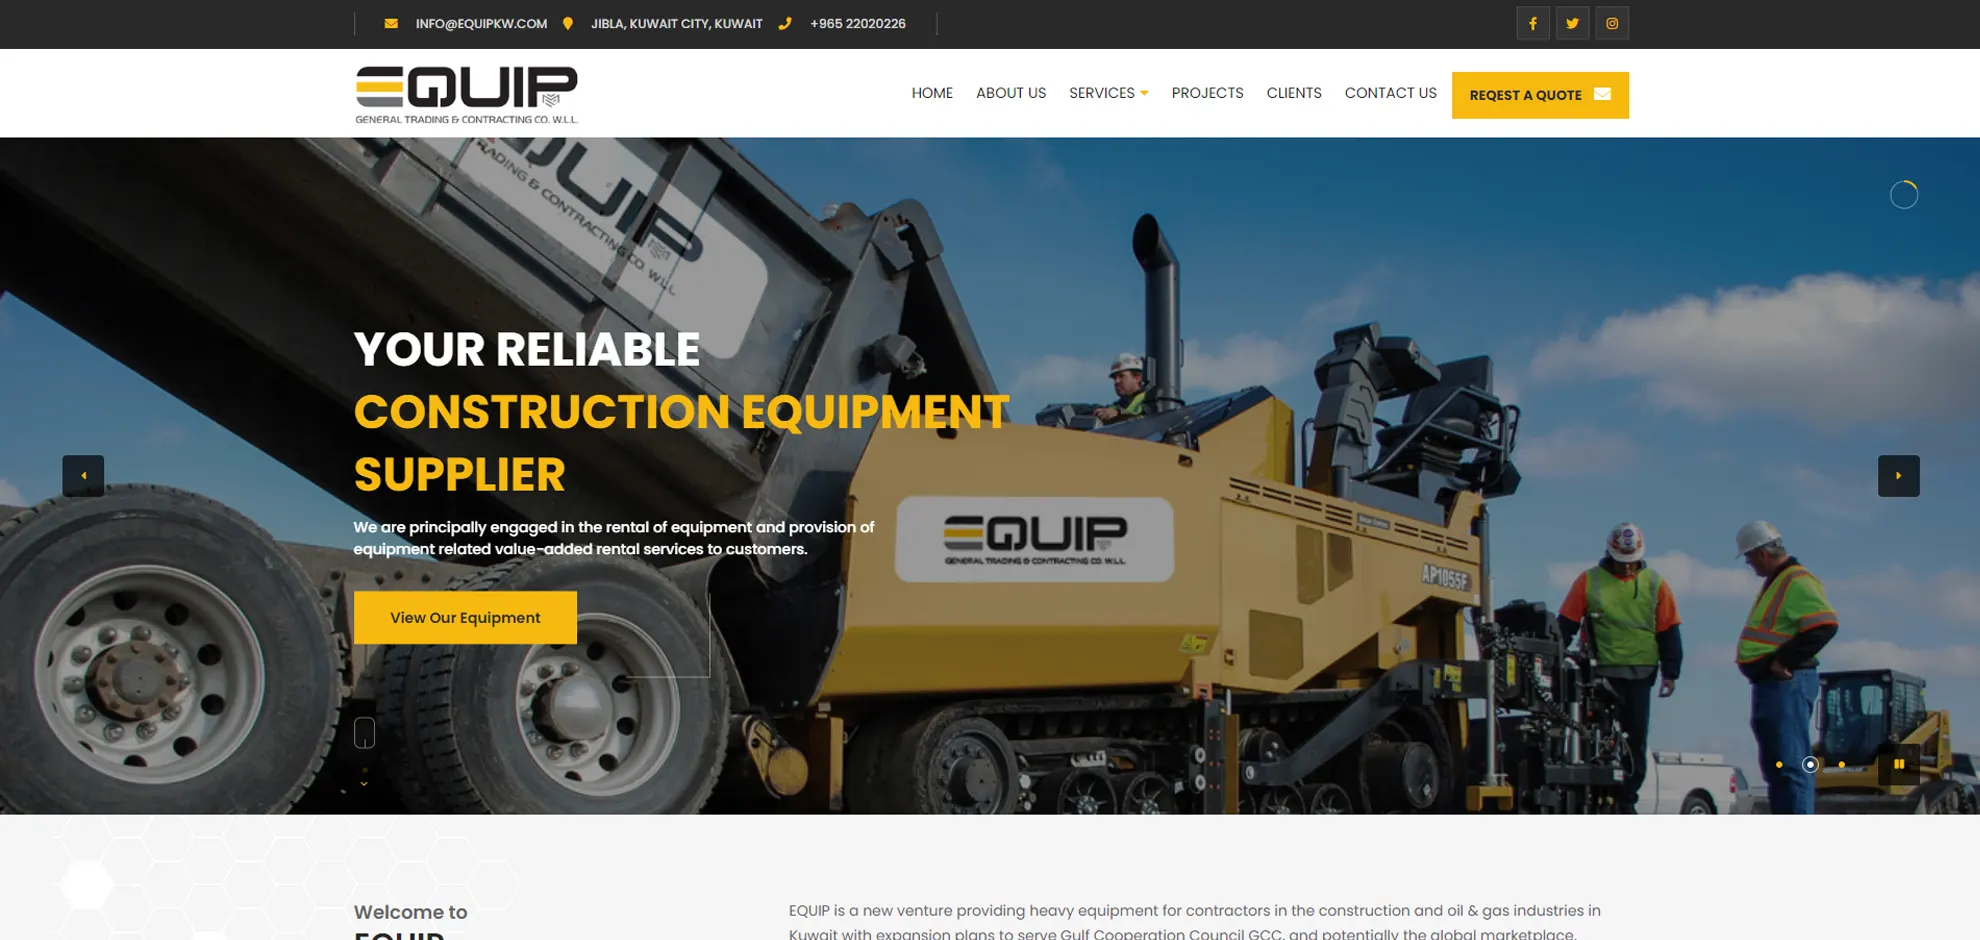 EQUIP GENERAL TRADING & CONTRACTING CO